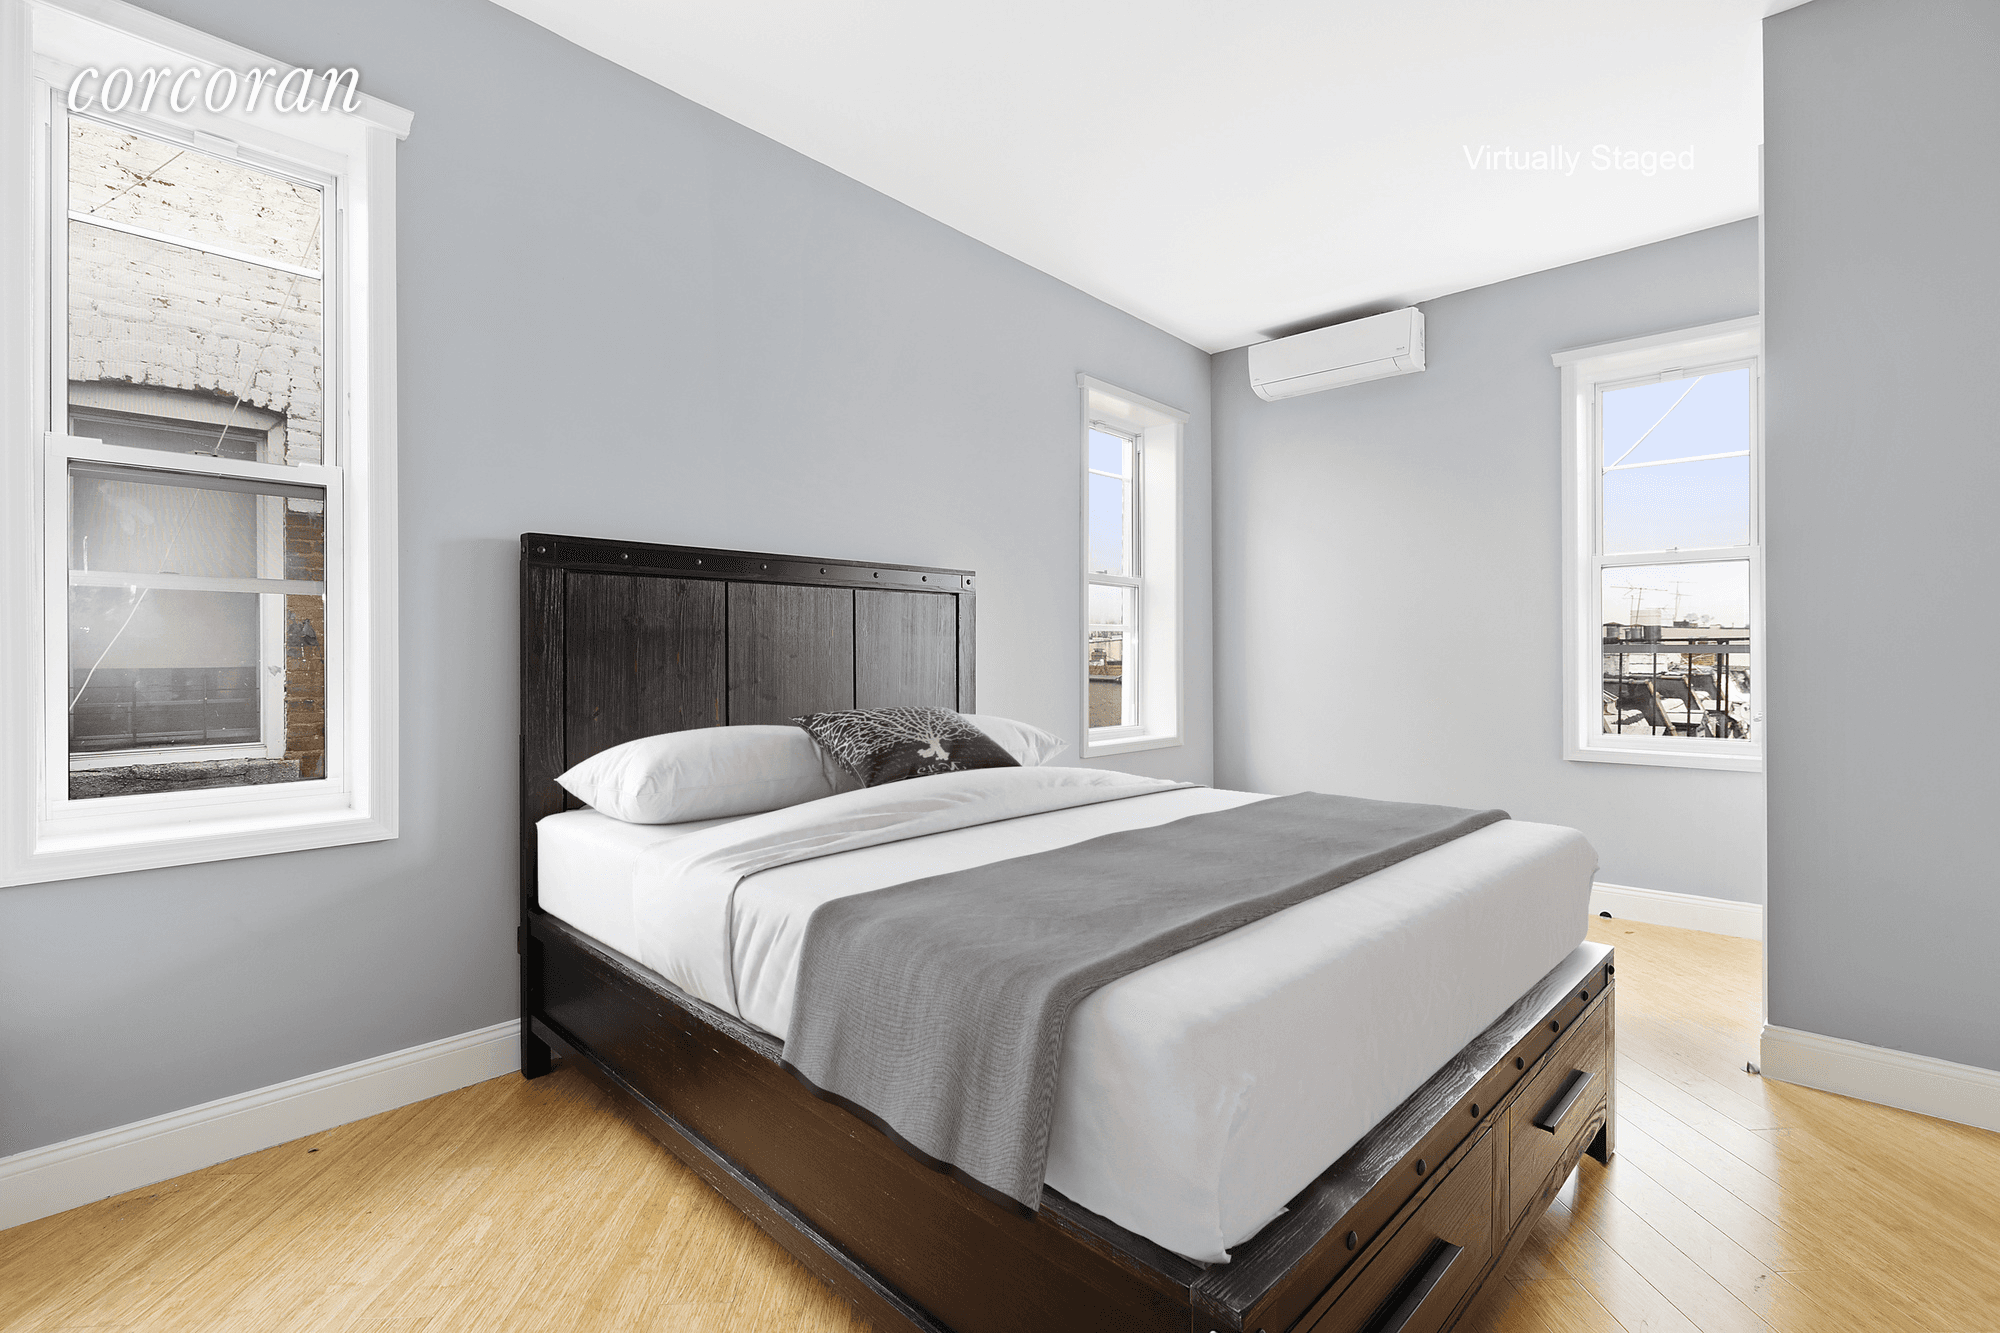 Welcoming both short term and long term tenants to this meticulously gut renovated furnished apartment nestled up in a charming PLG Prospect Lefferts Gardens Pre war building.